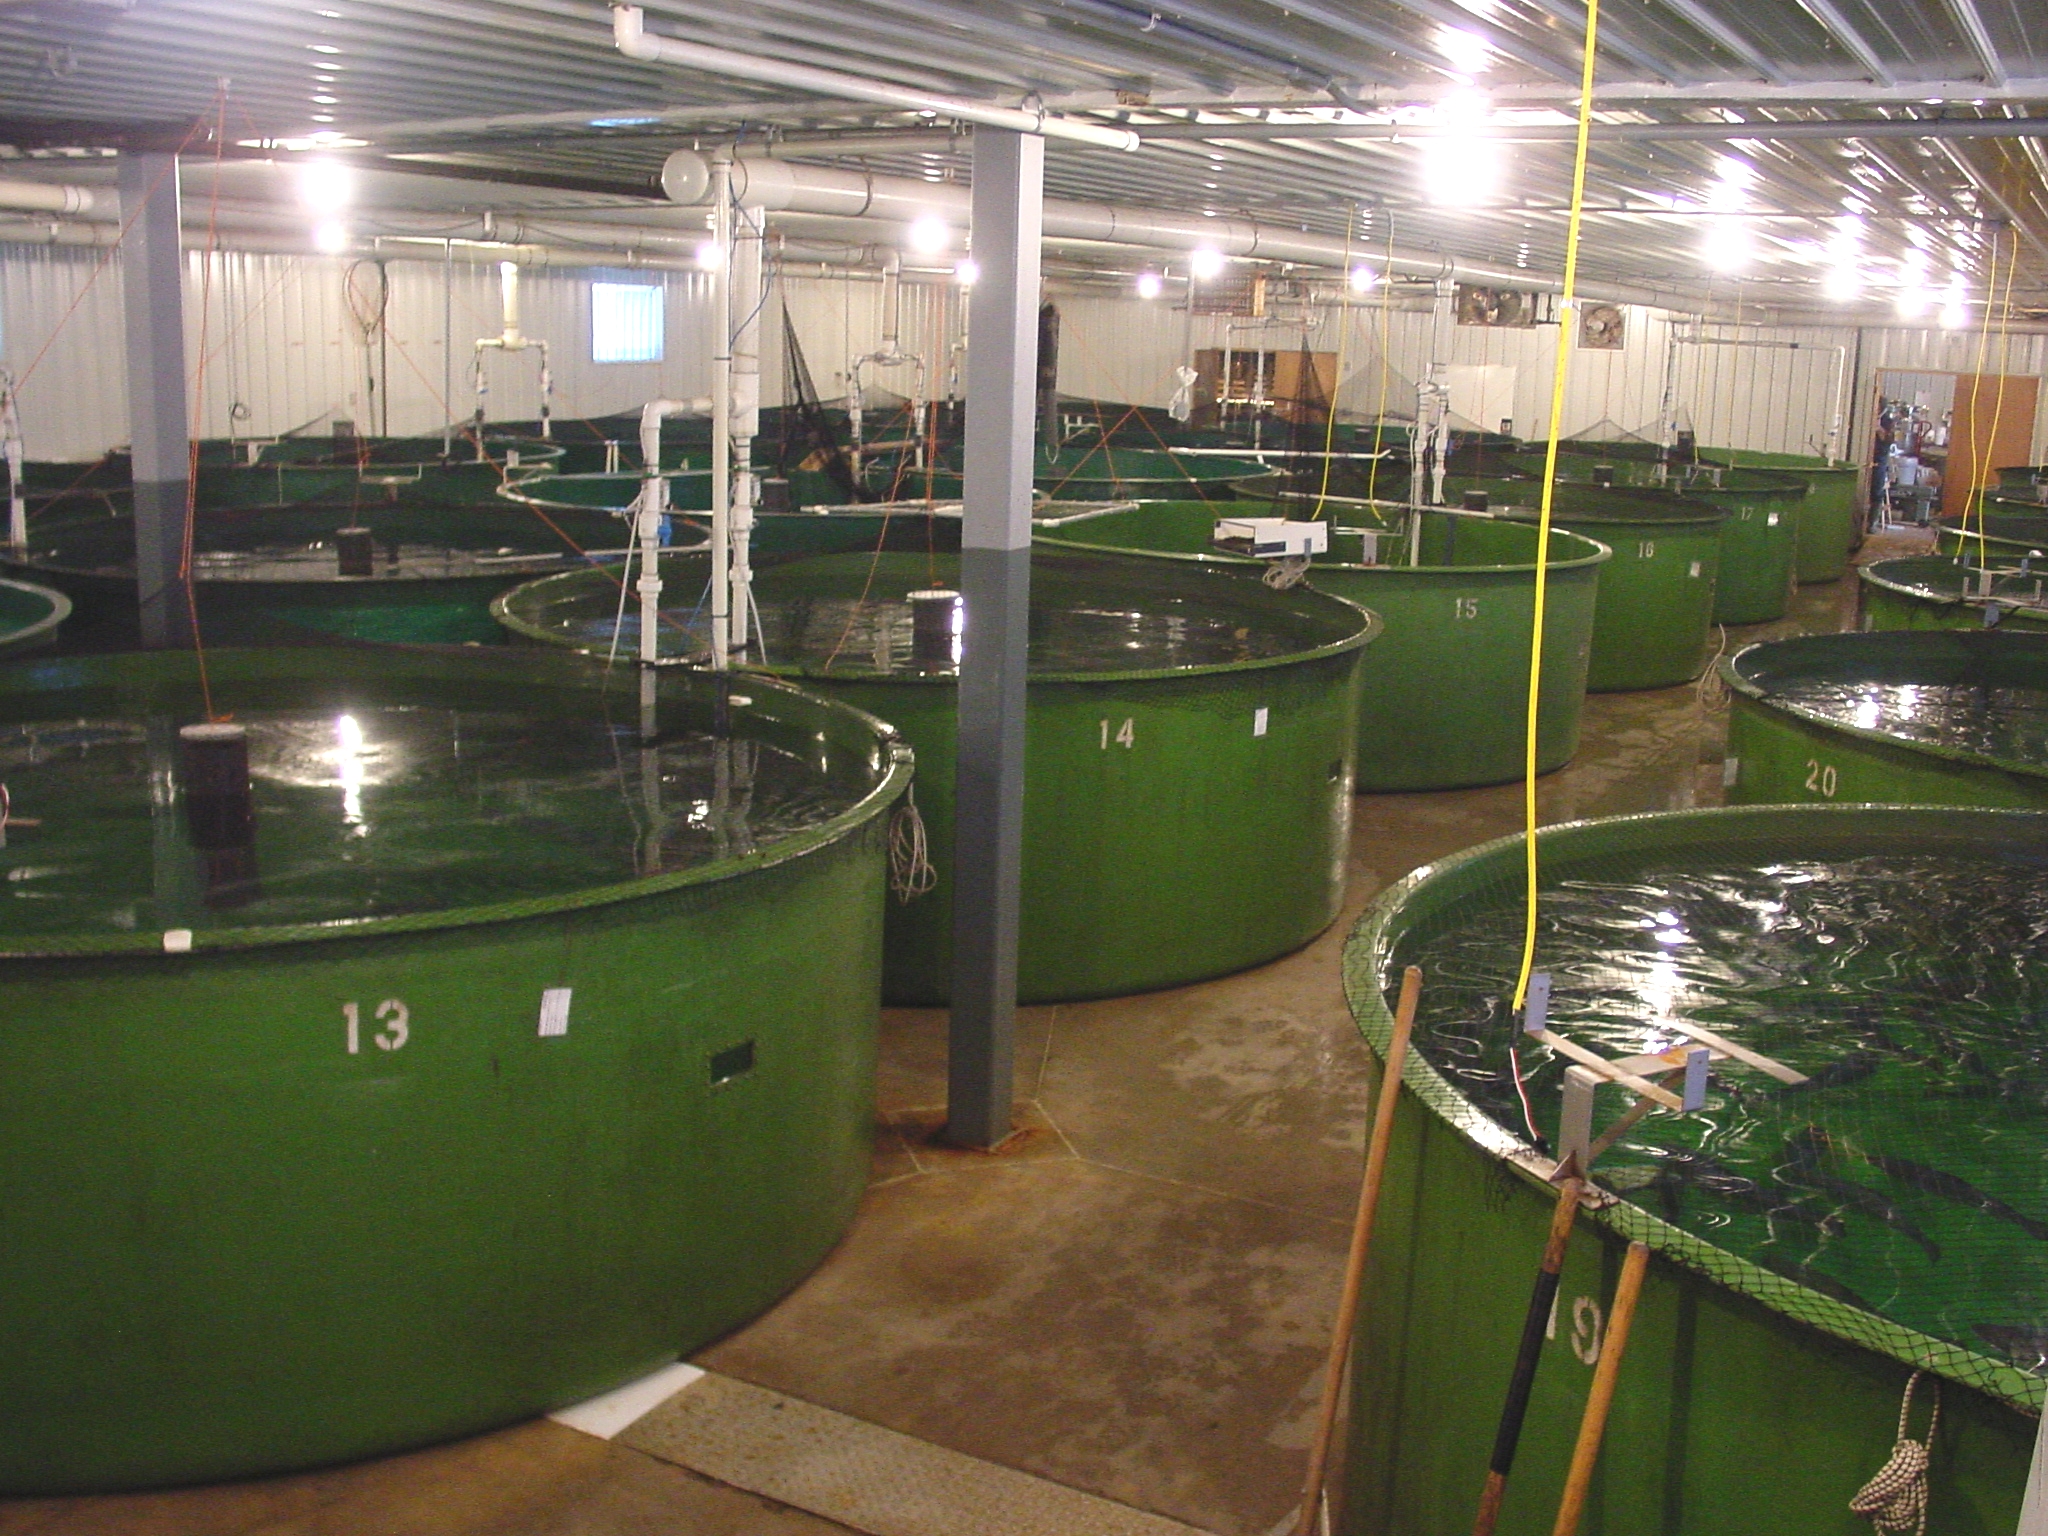 Tanks containing AquaBounty's genetically modified salmon in Waltham, Mass. (Barcroft Media—Barcroft Media via Getty Images)